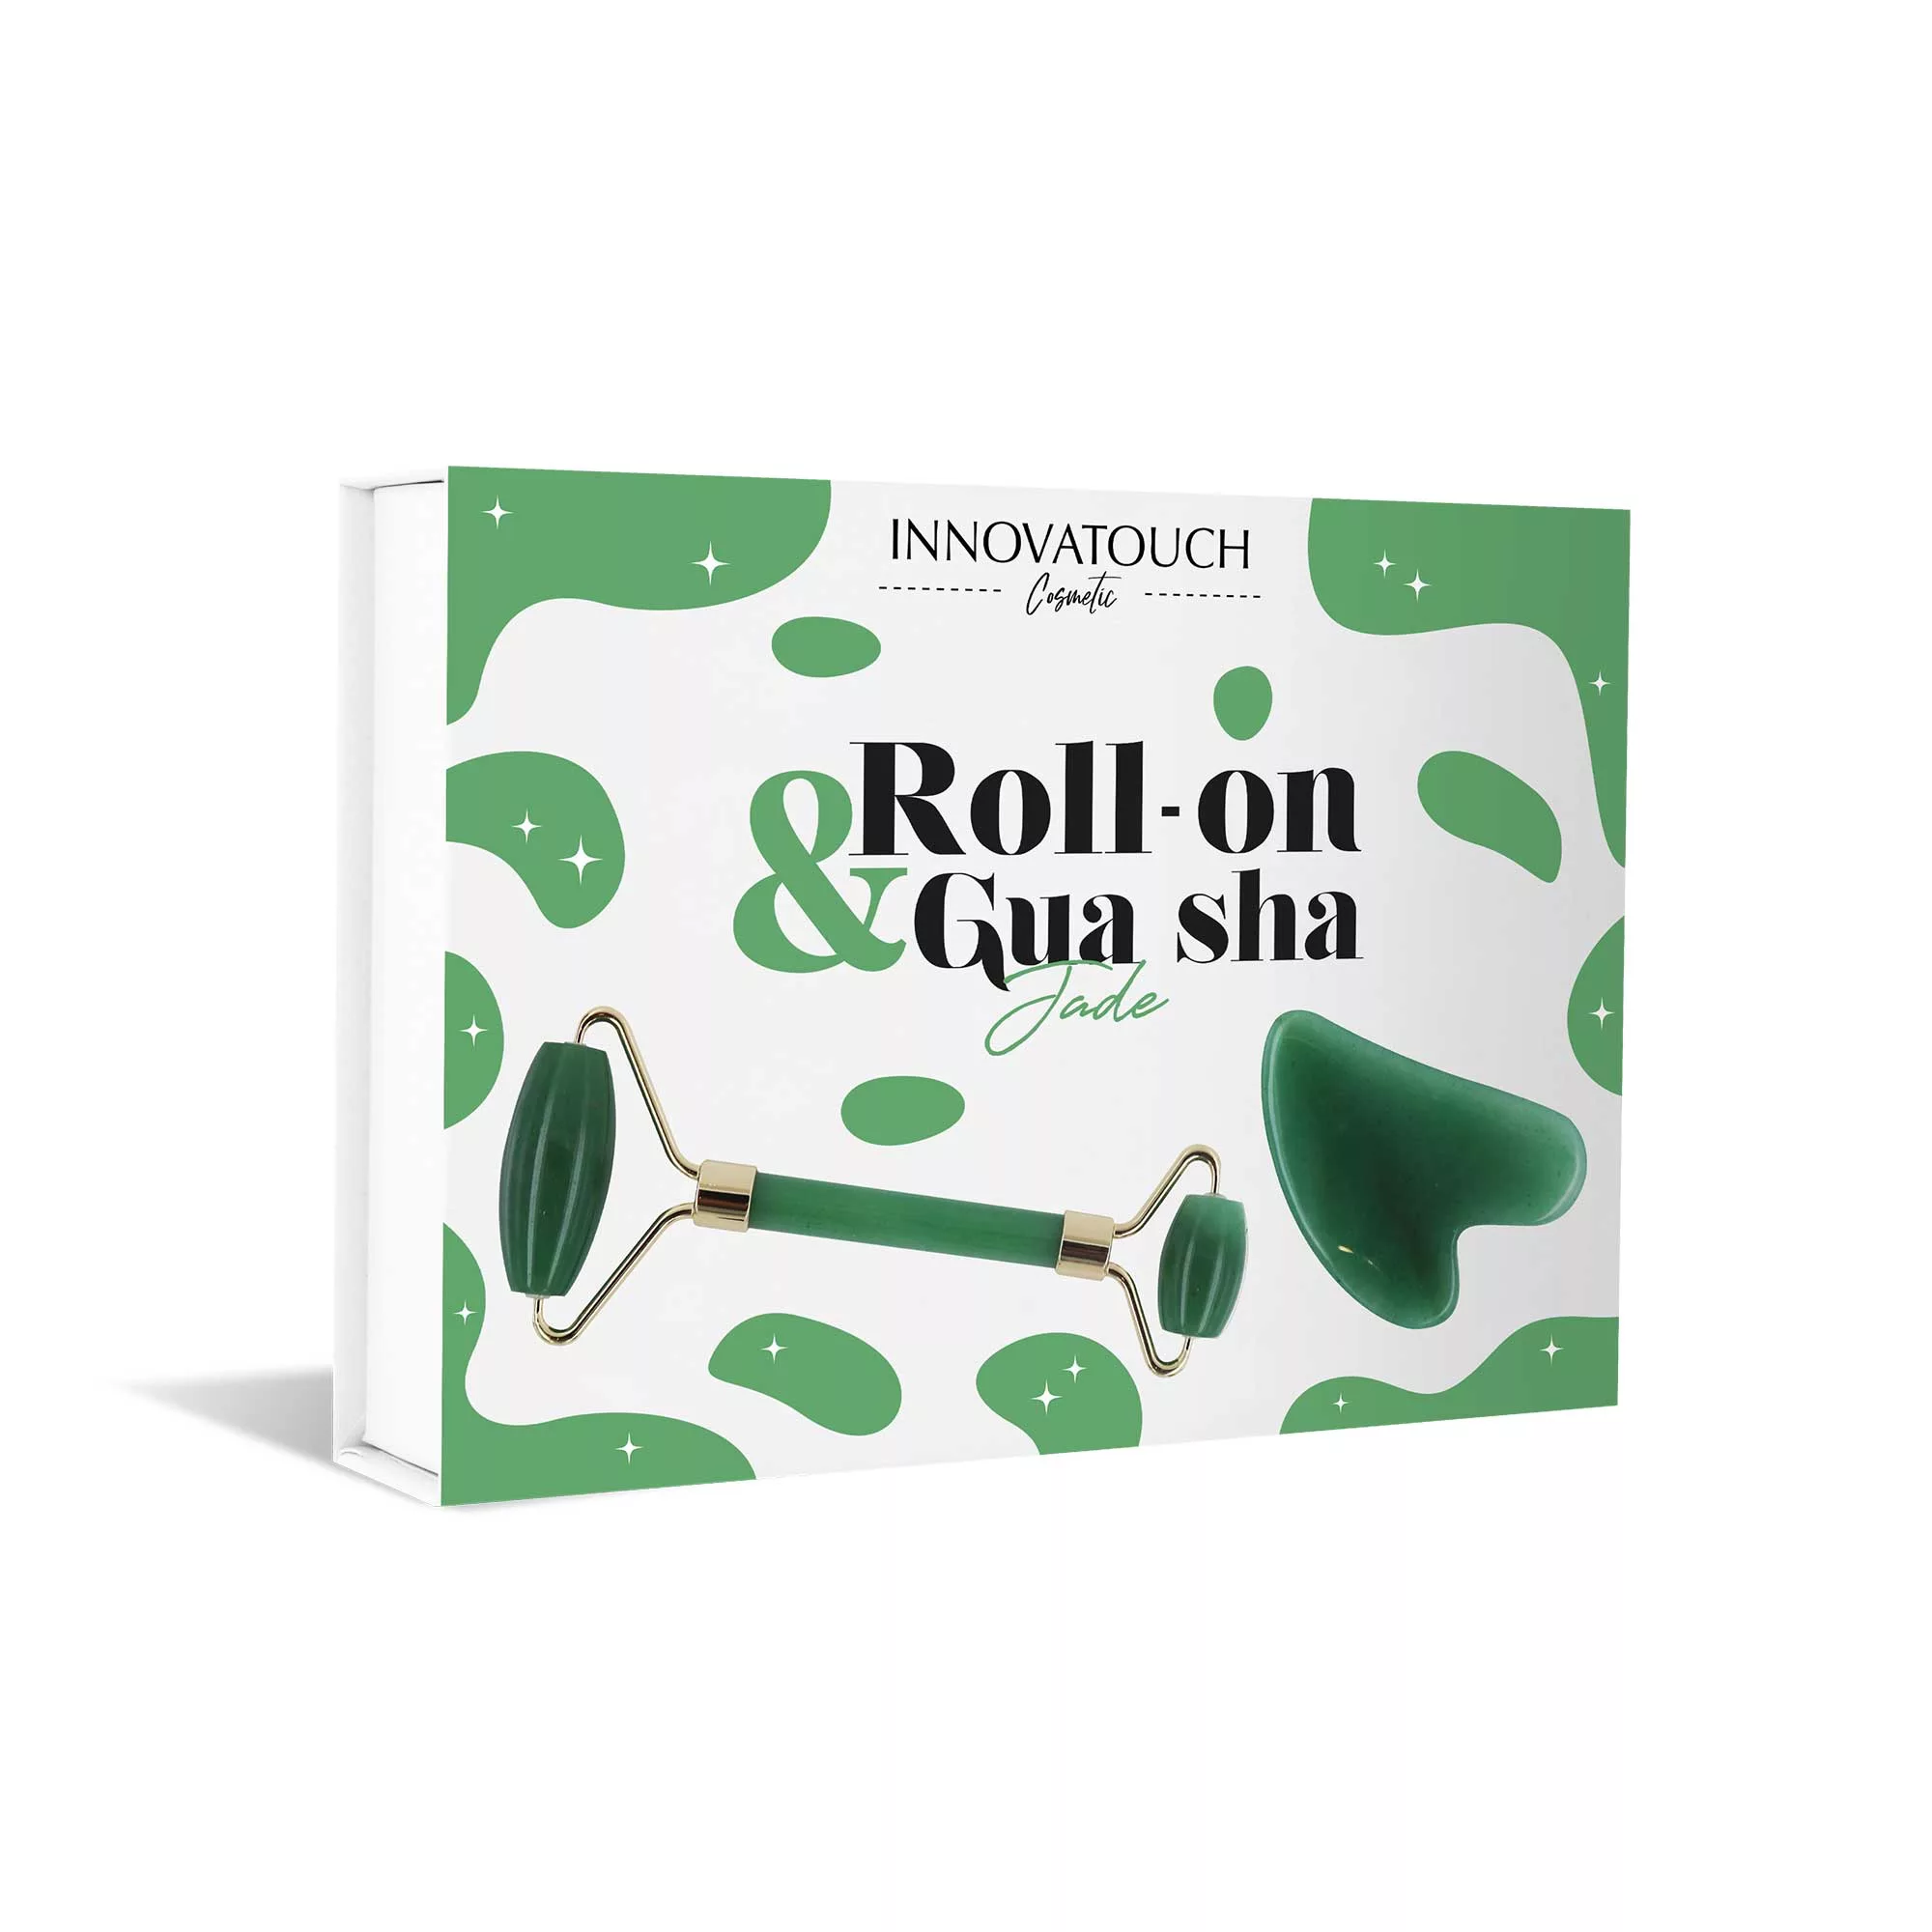 COFFRET-roll-on-jade-1-cadeaux-innovatouch-cosmetic